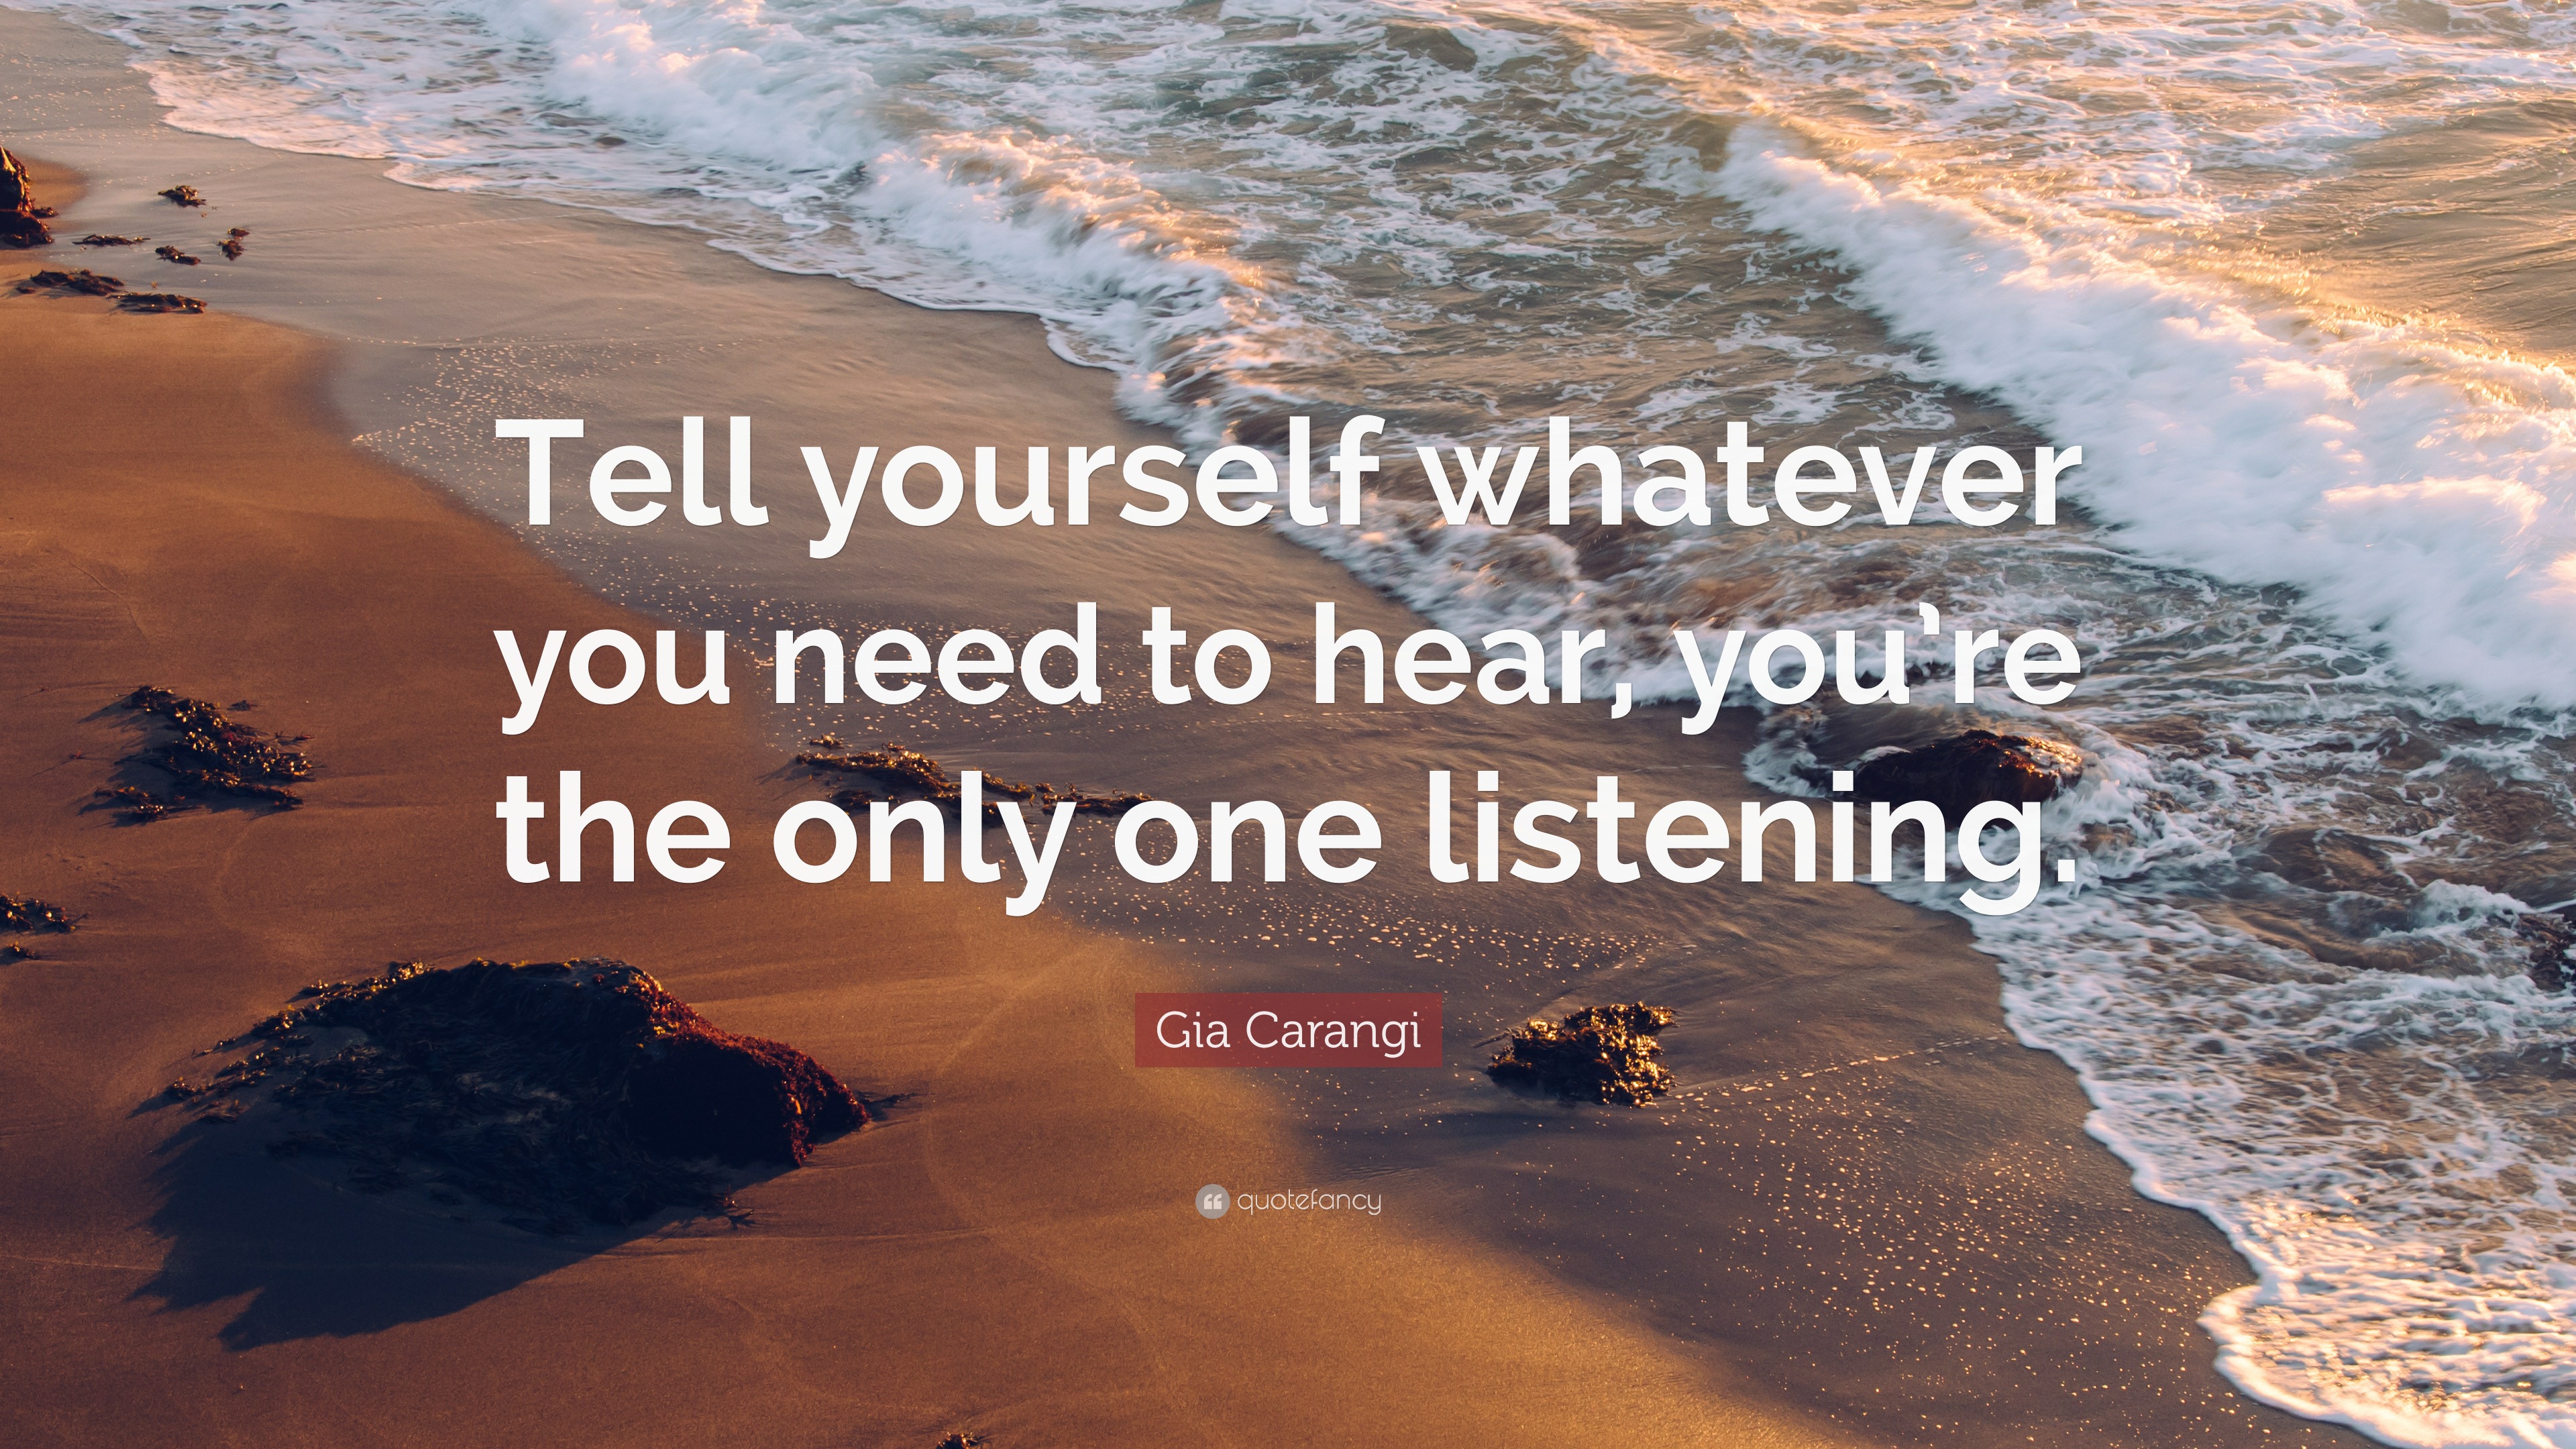 Gia Carangi Quote: “Tell yourself whatever you need to hear, you’re the ...